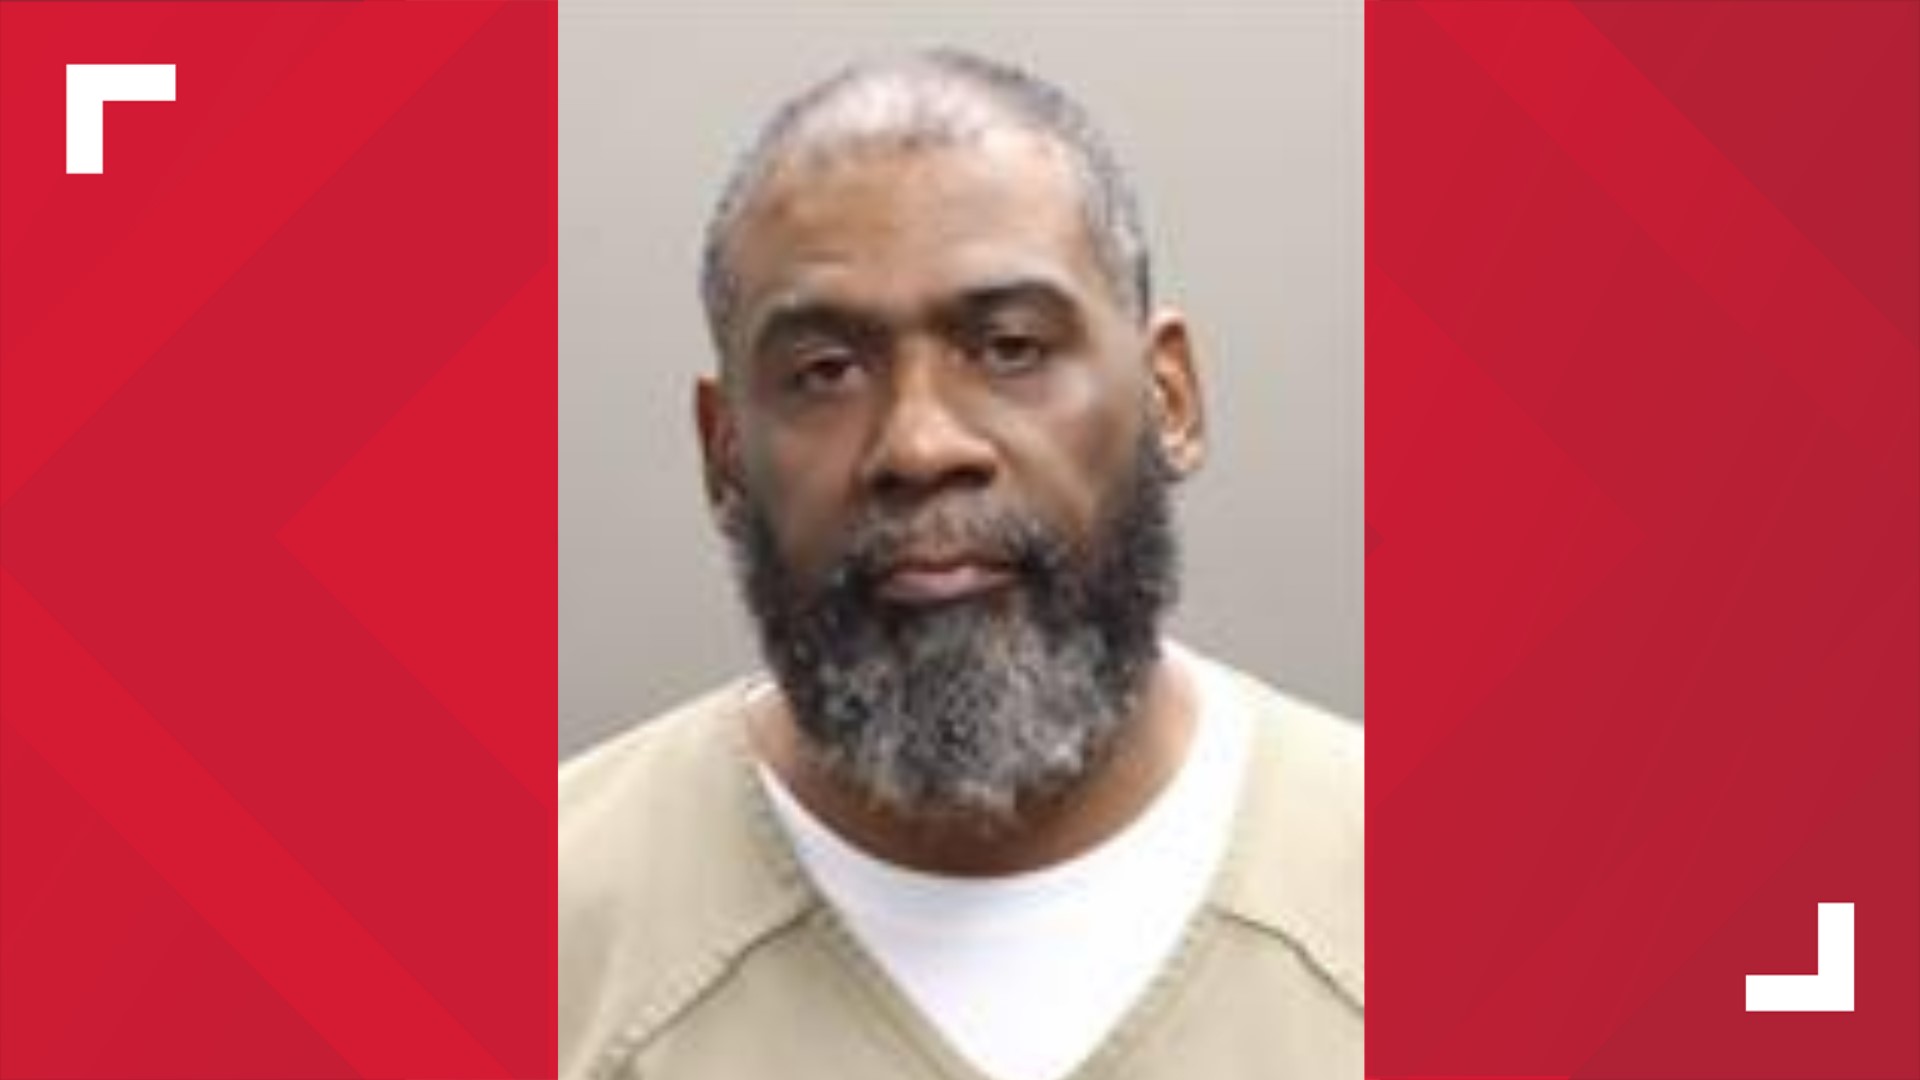 According to the Columbus Division of Police, 49-year-old Laroy Robinson surrendered without incident at the Franklin County Jail Wednesday.